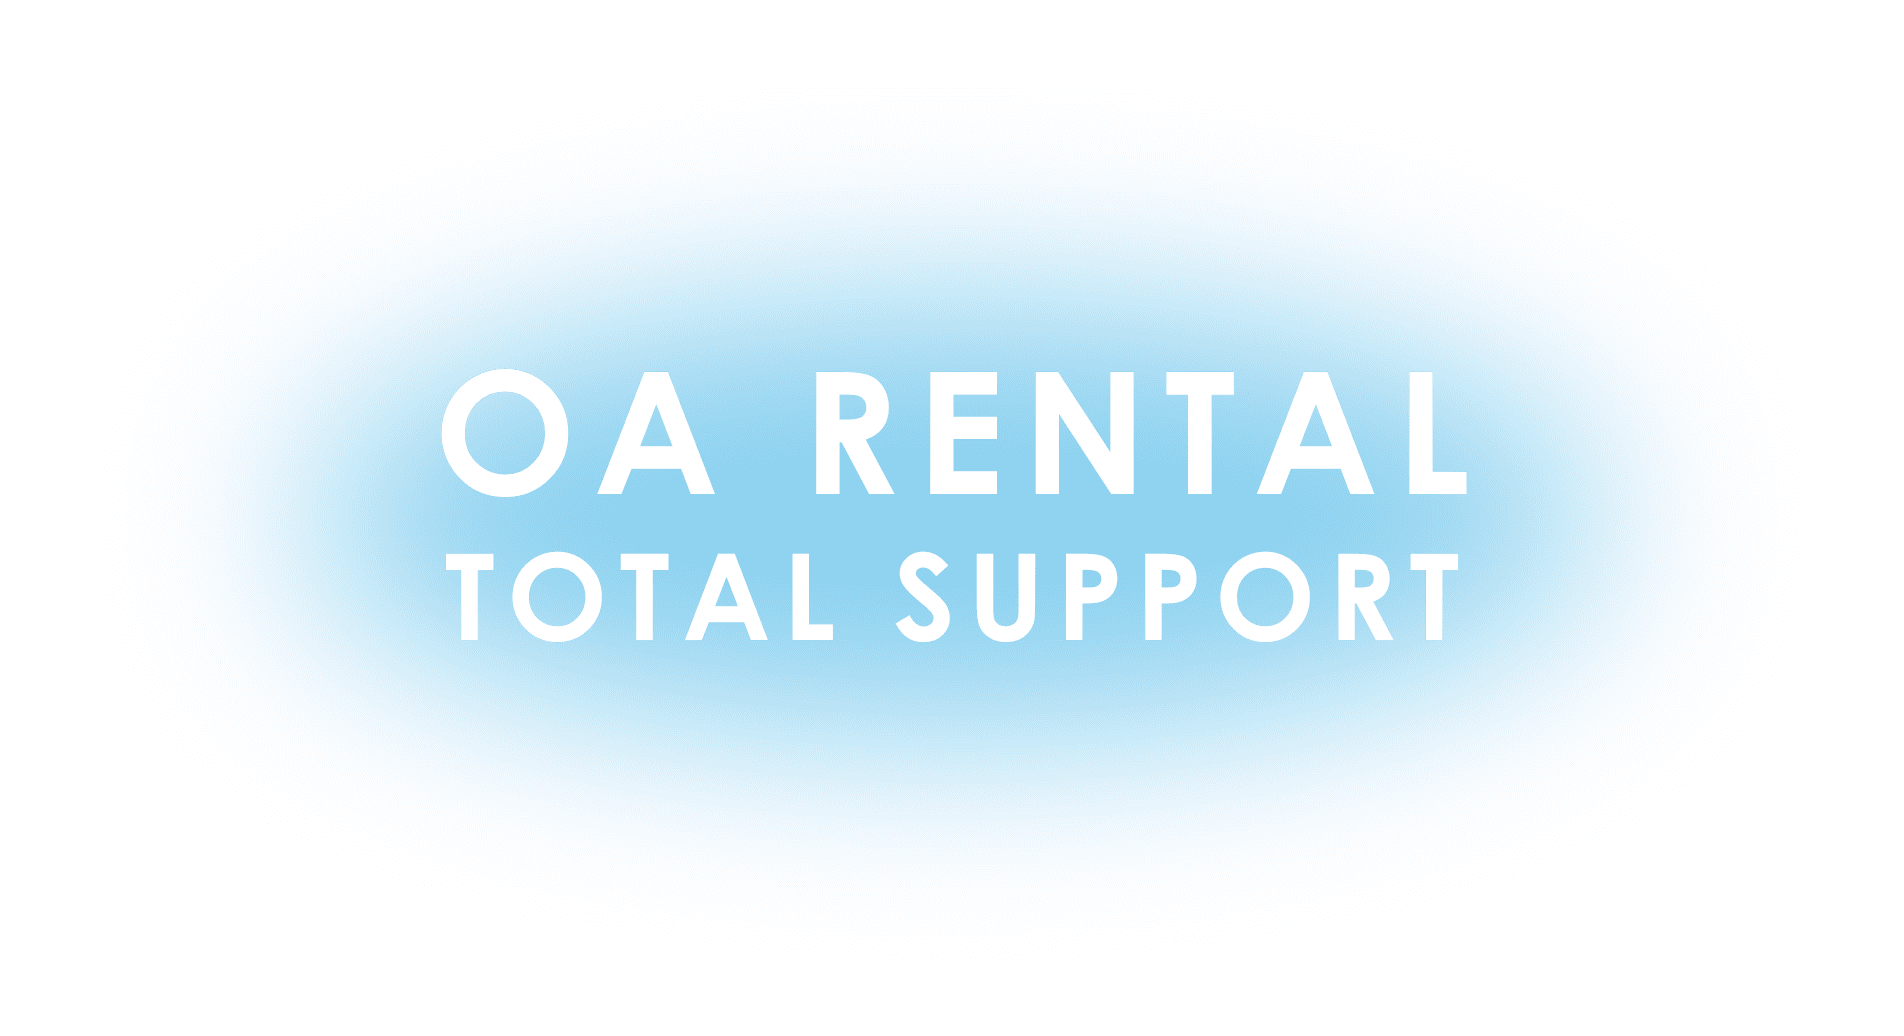 OA RENTAL TOTAL SUPPORT